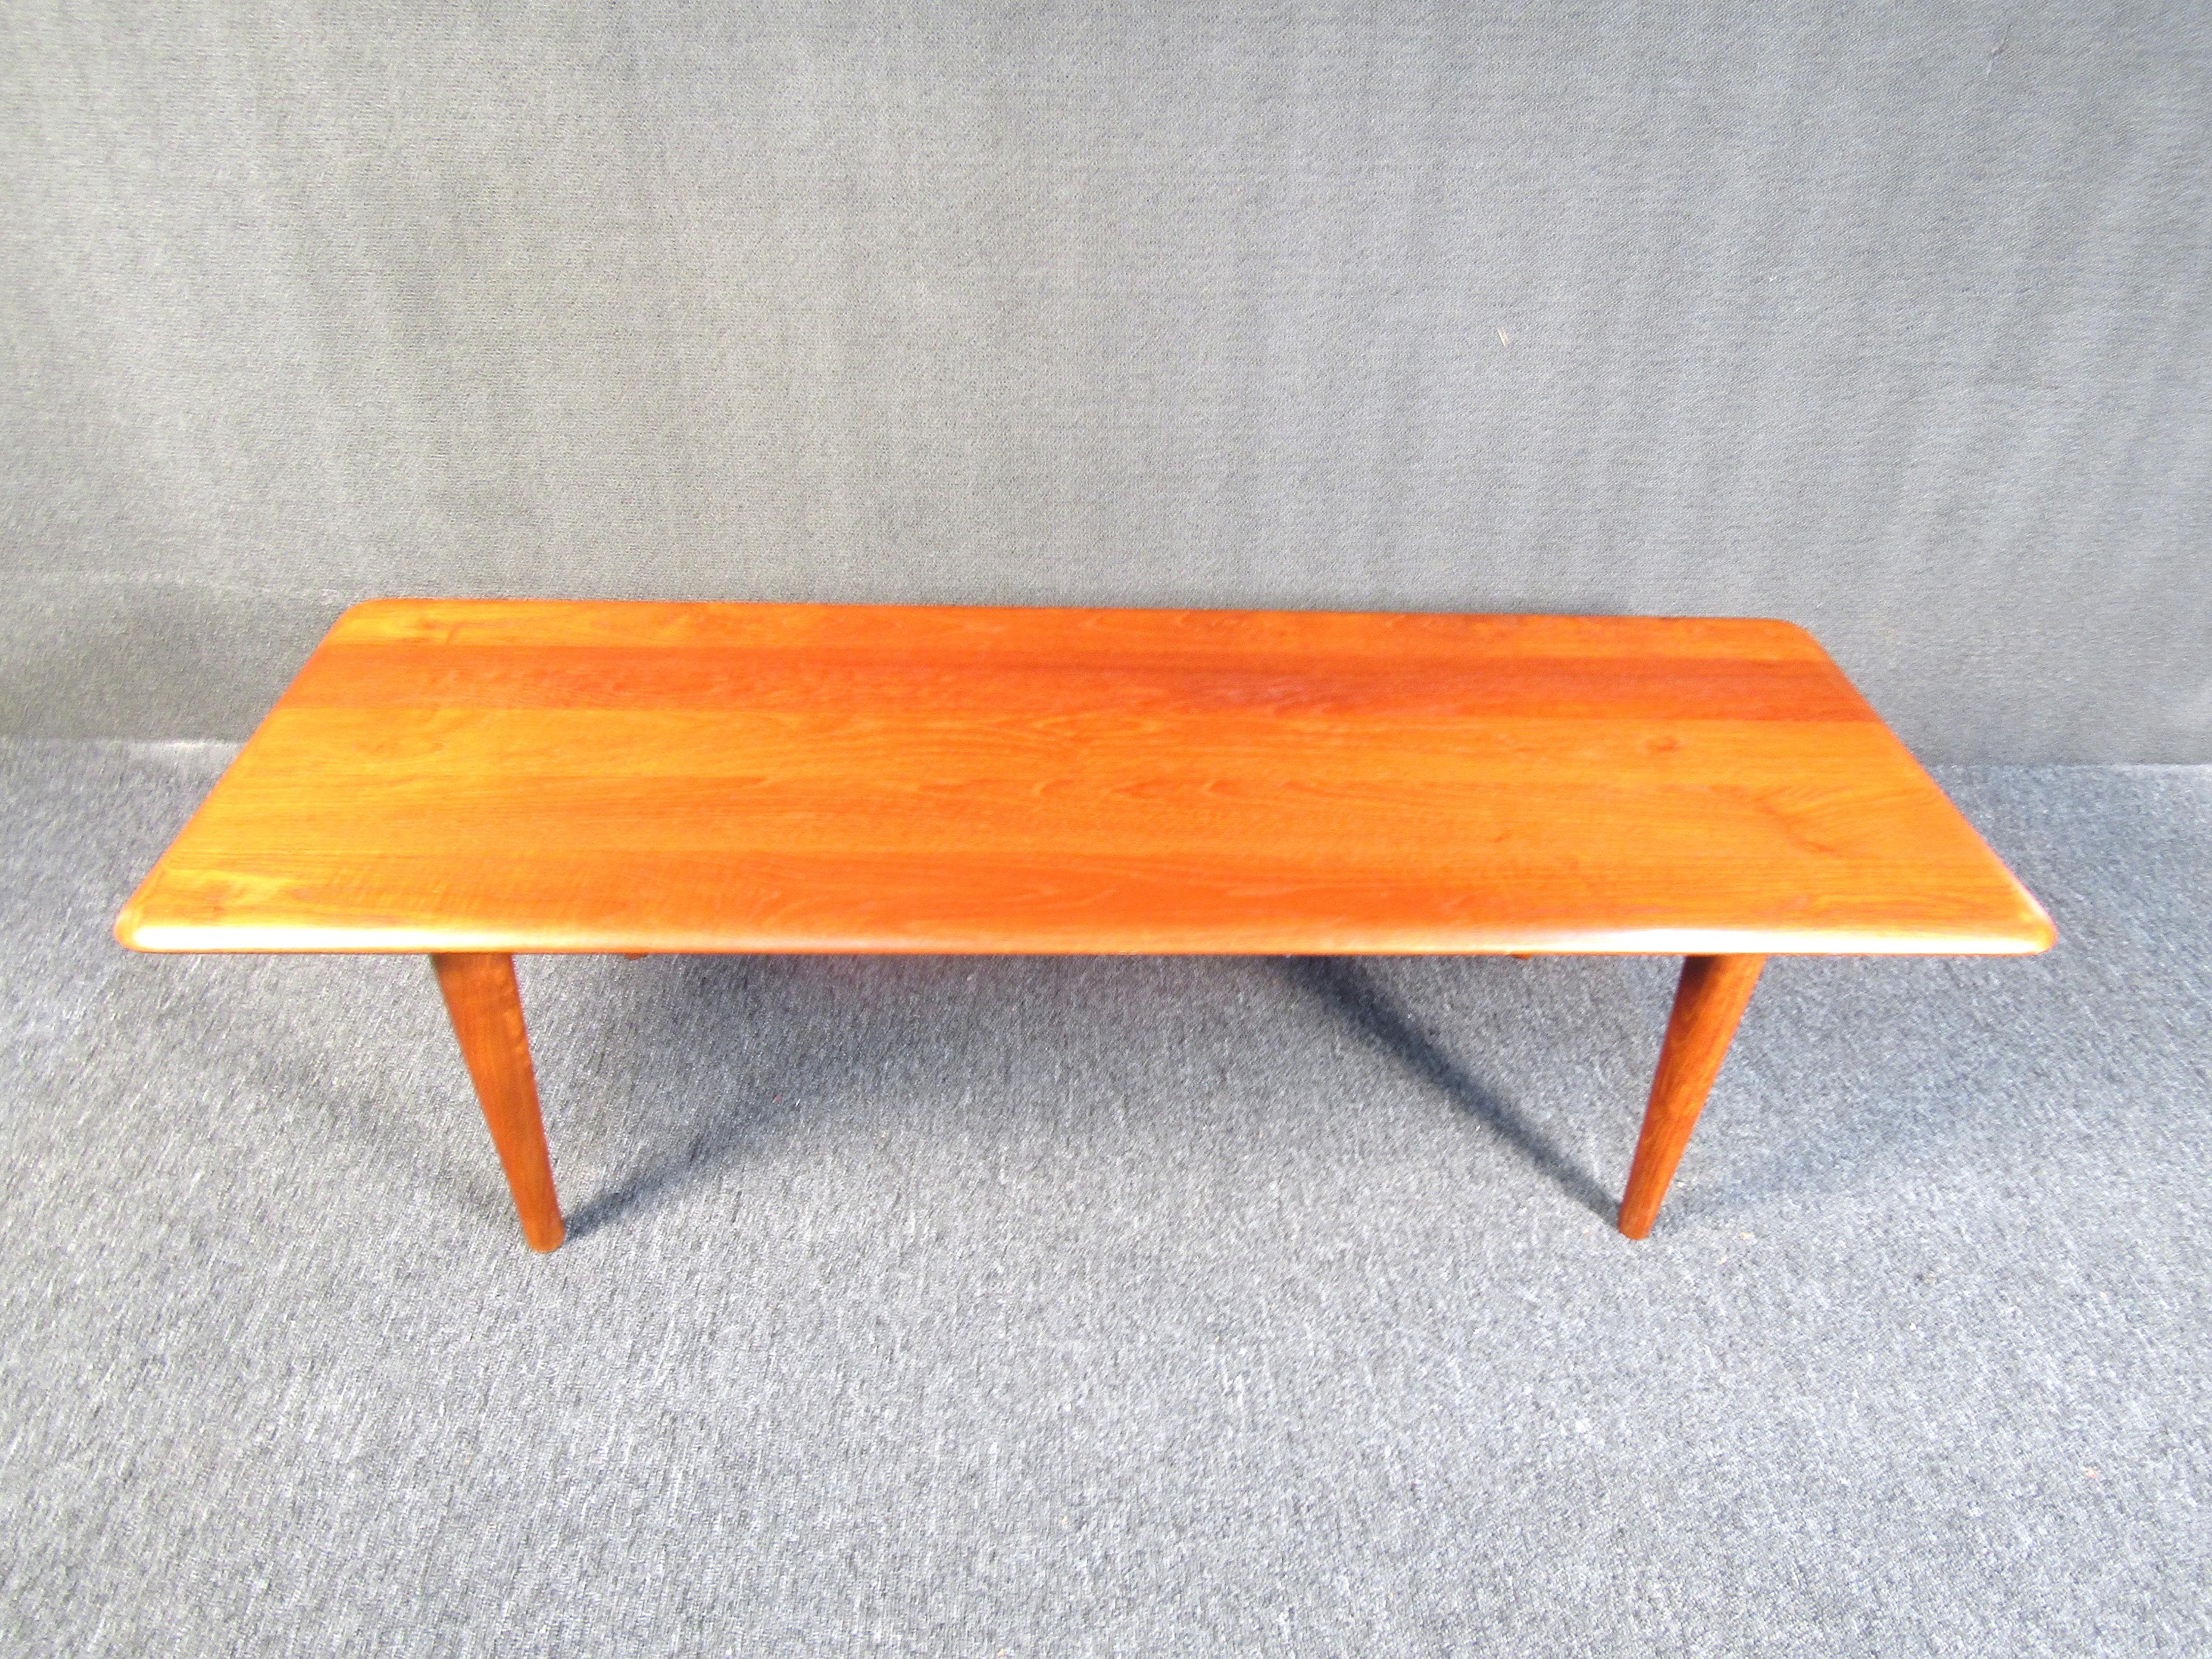 Large Midcentury Teak Wood Coffee Table In Good Condition For Sale In Brooklyn, NY